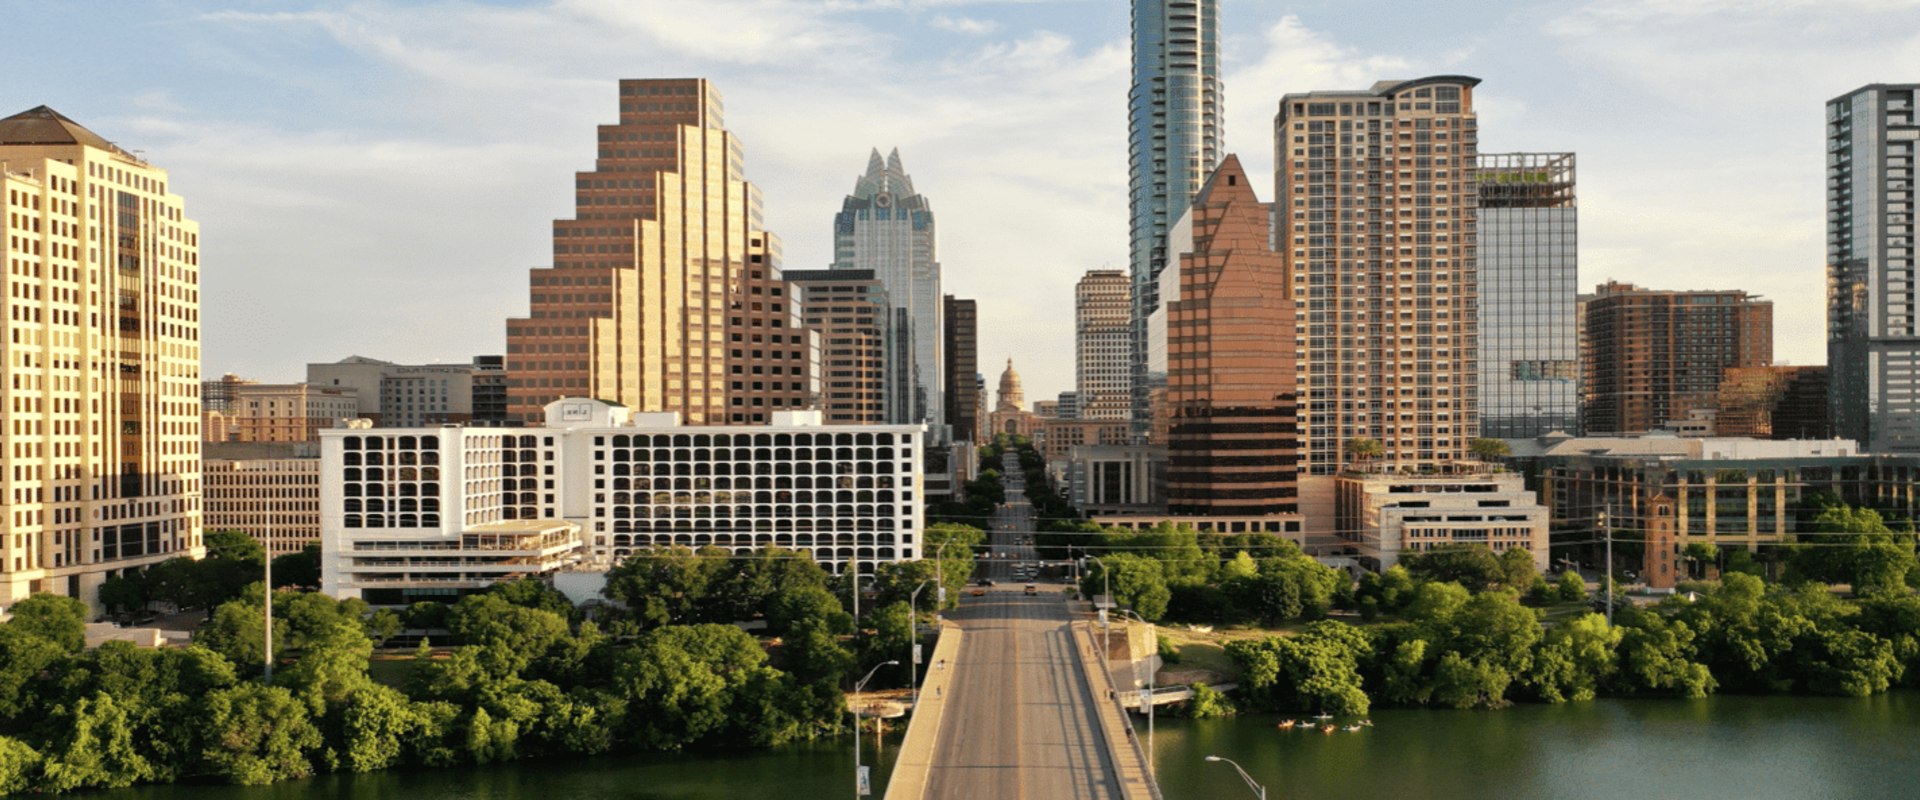 Does Cleaning Businesses in Austin, Texas Have a Referral Program?